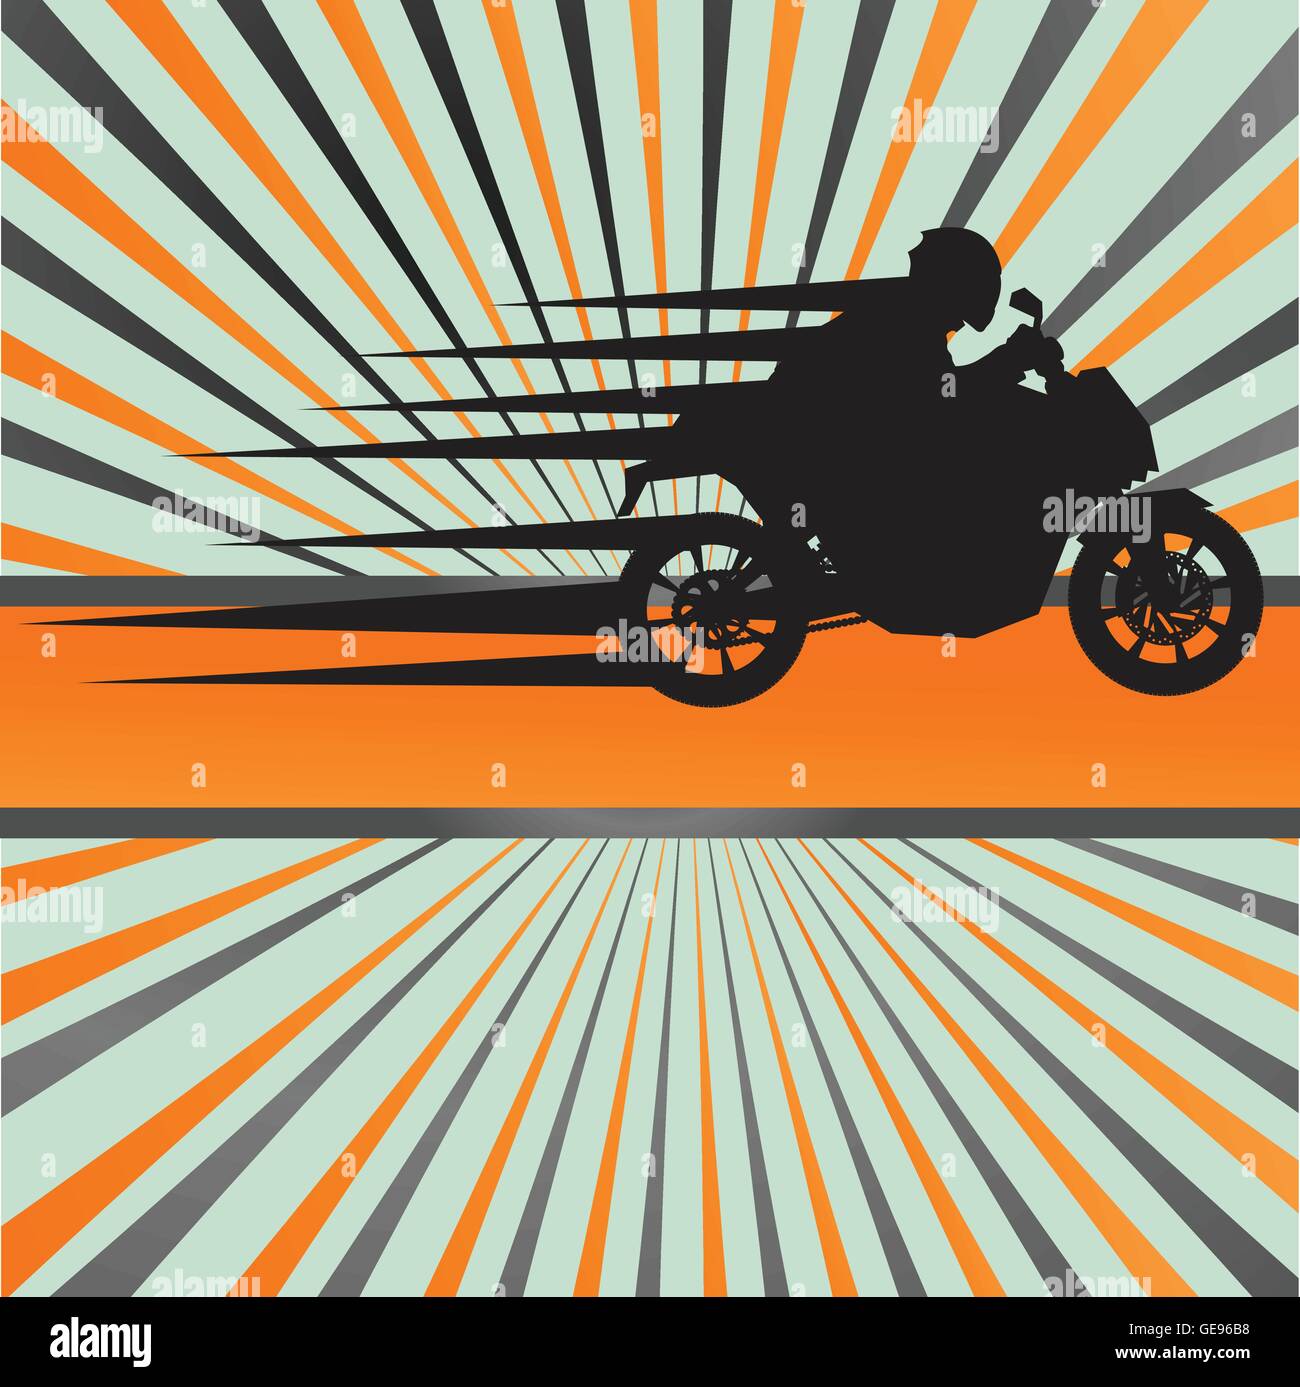 Race motorcycle burst vector background for poster Stock Vector